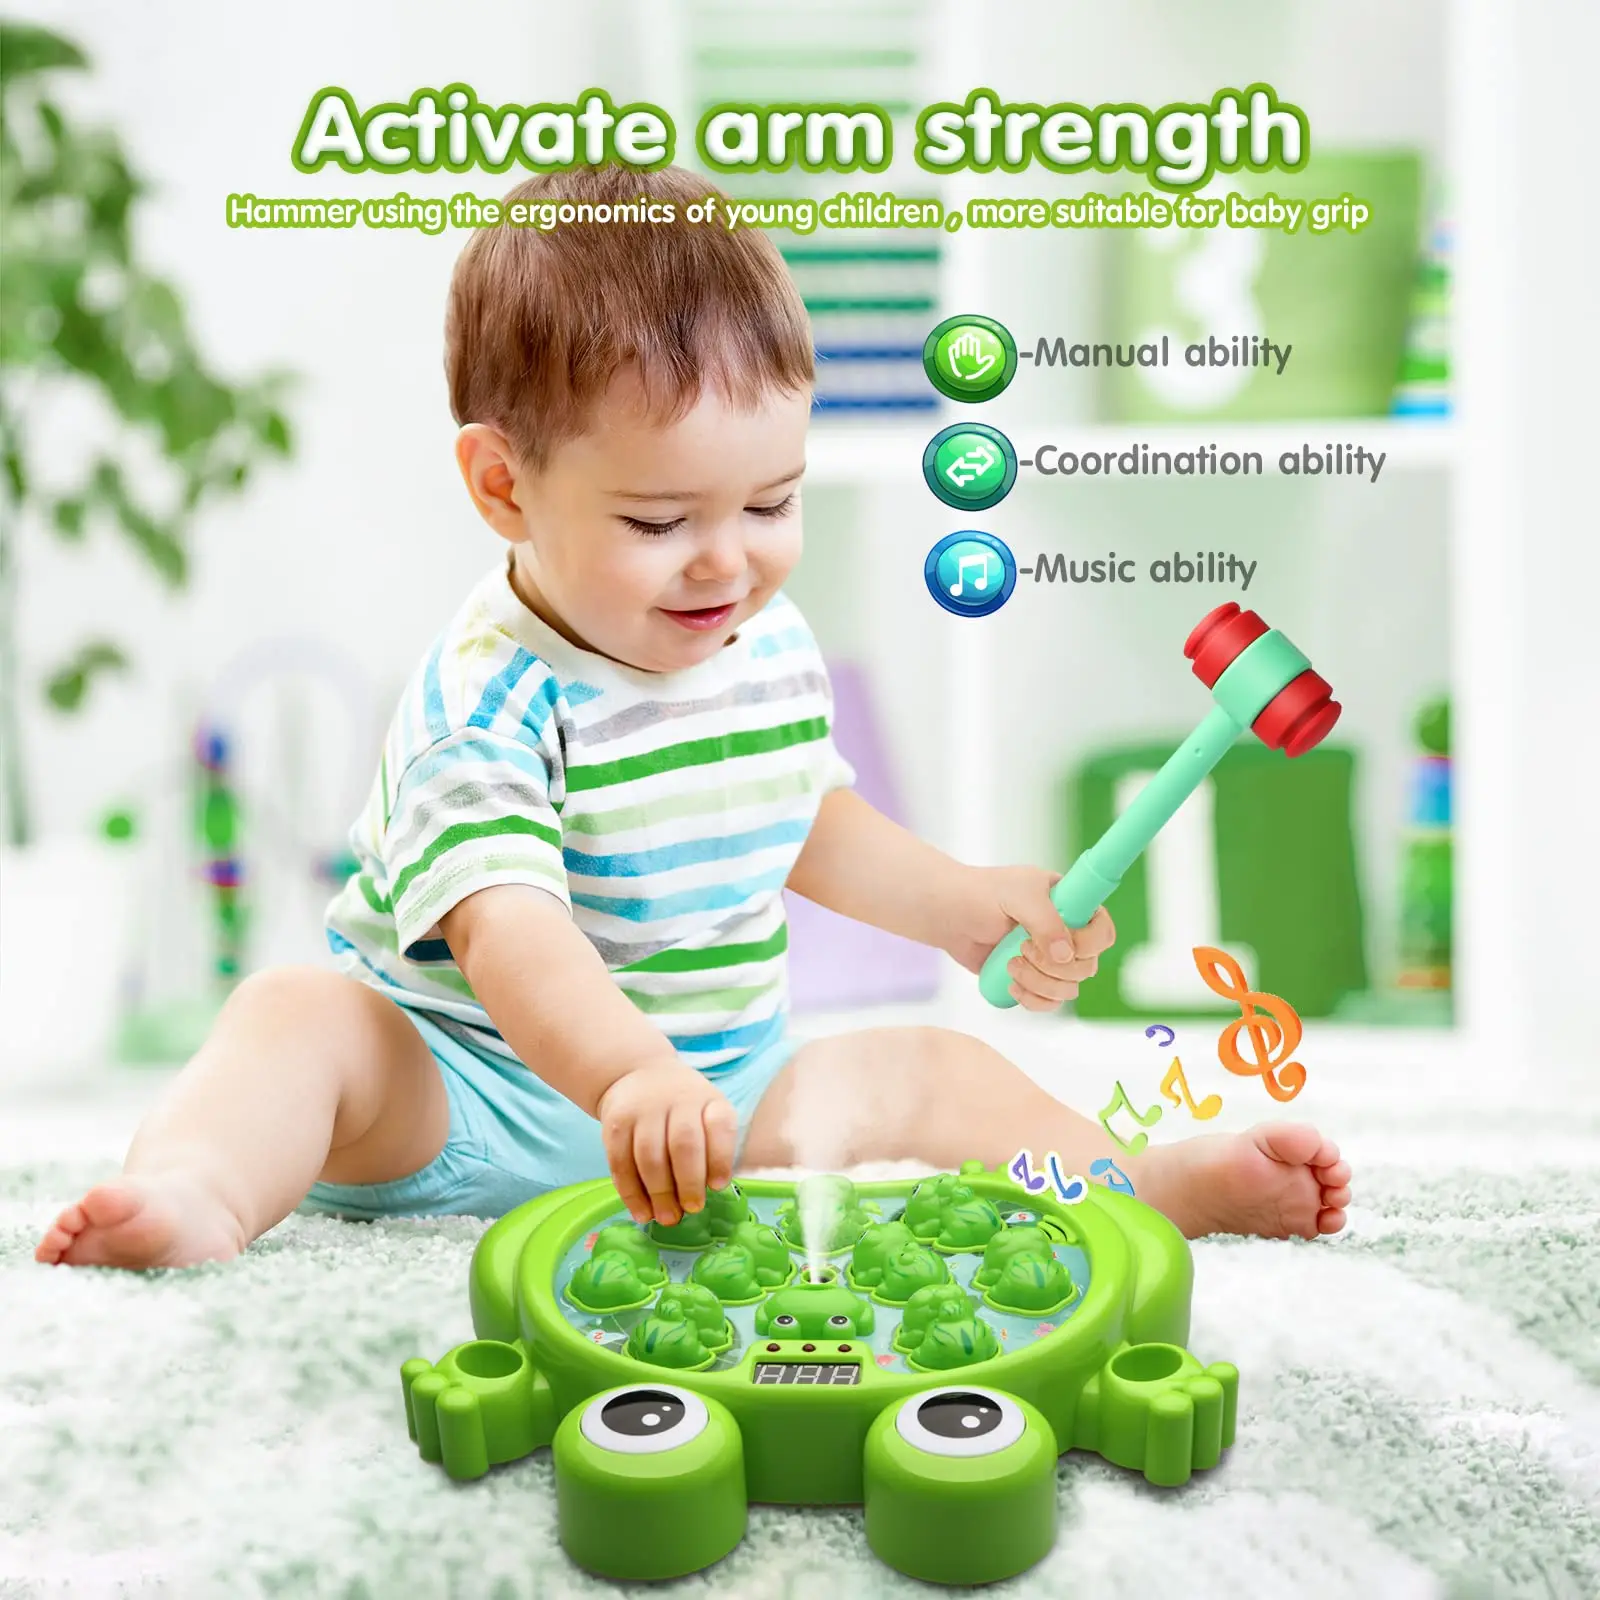 Interactive Whack A Frog Game For Kids Included Electronic Challenging Game Machine With 2 Hammers